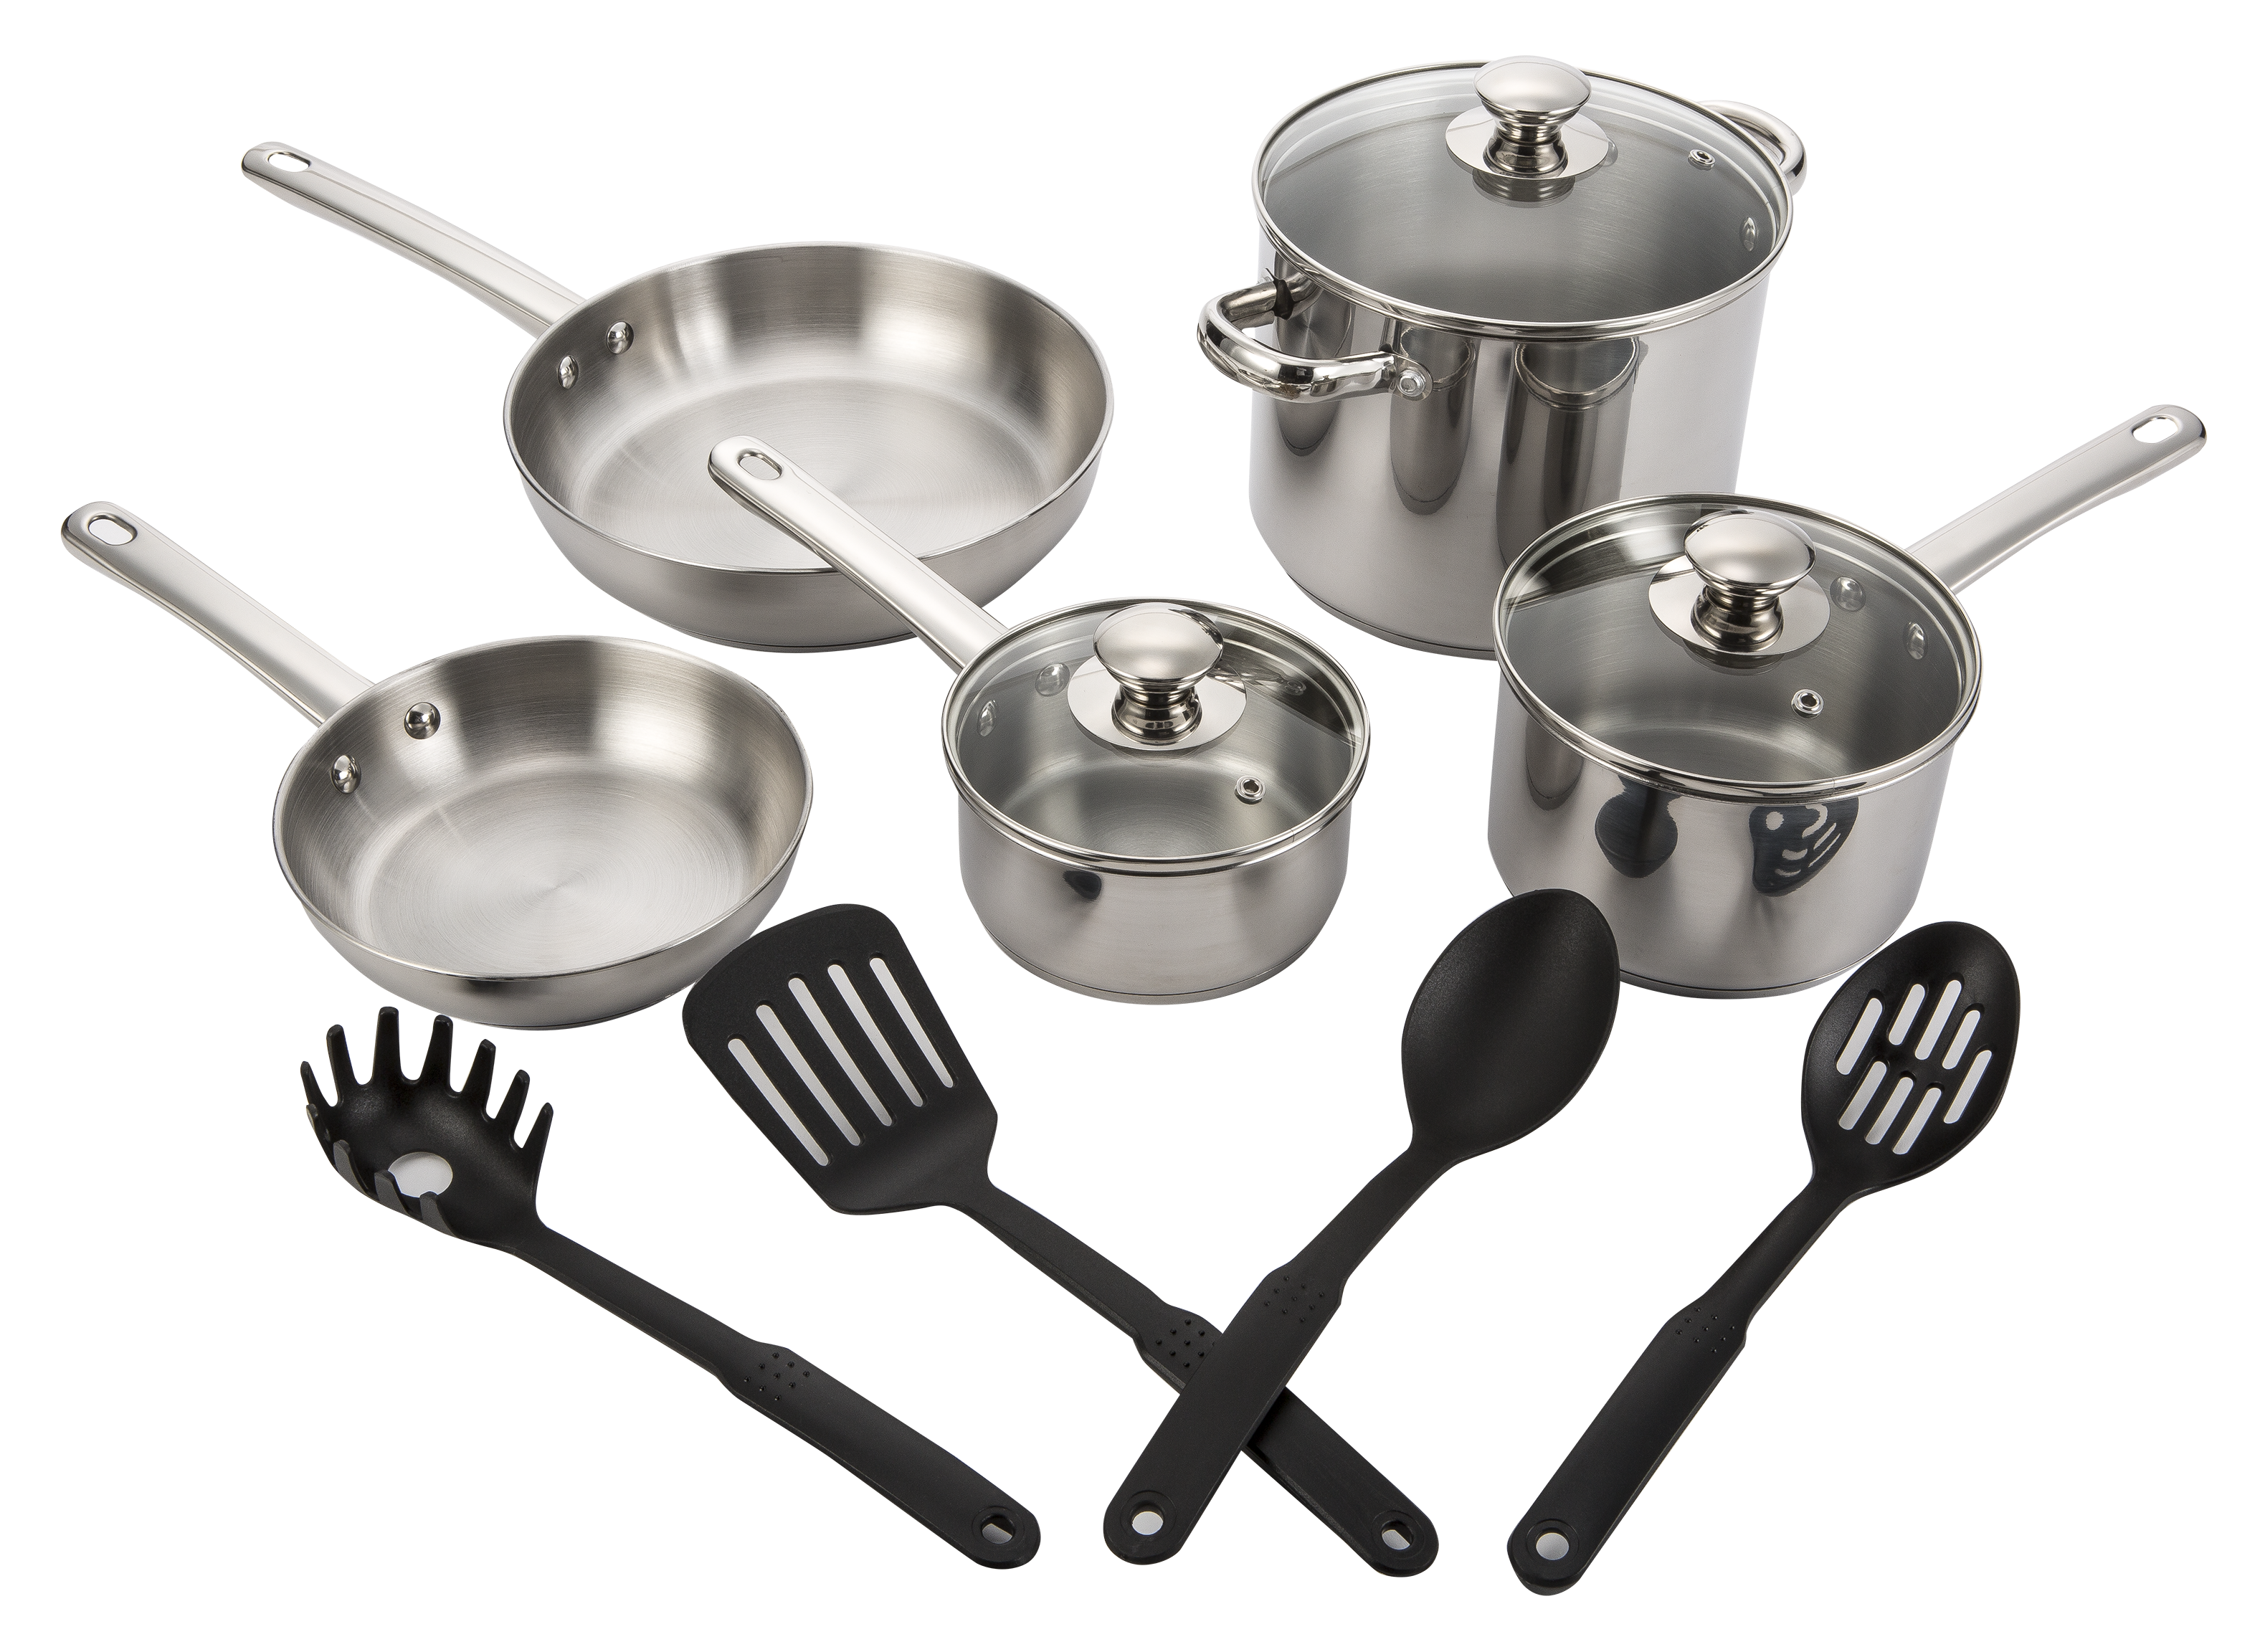 Tools of the Trade: The Ultimate Non-Stick Cookware Guide